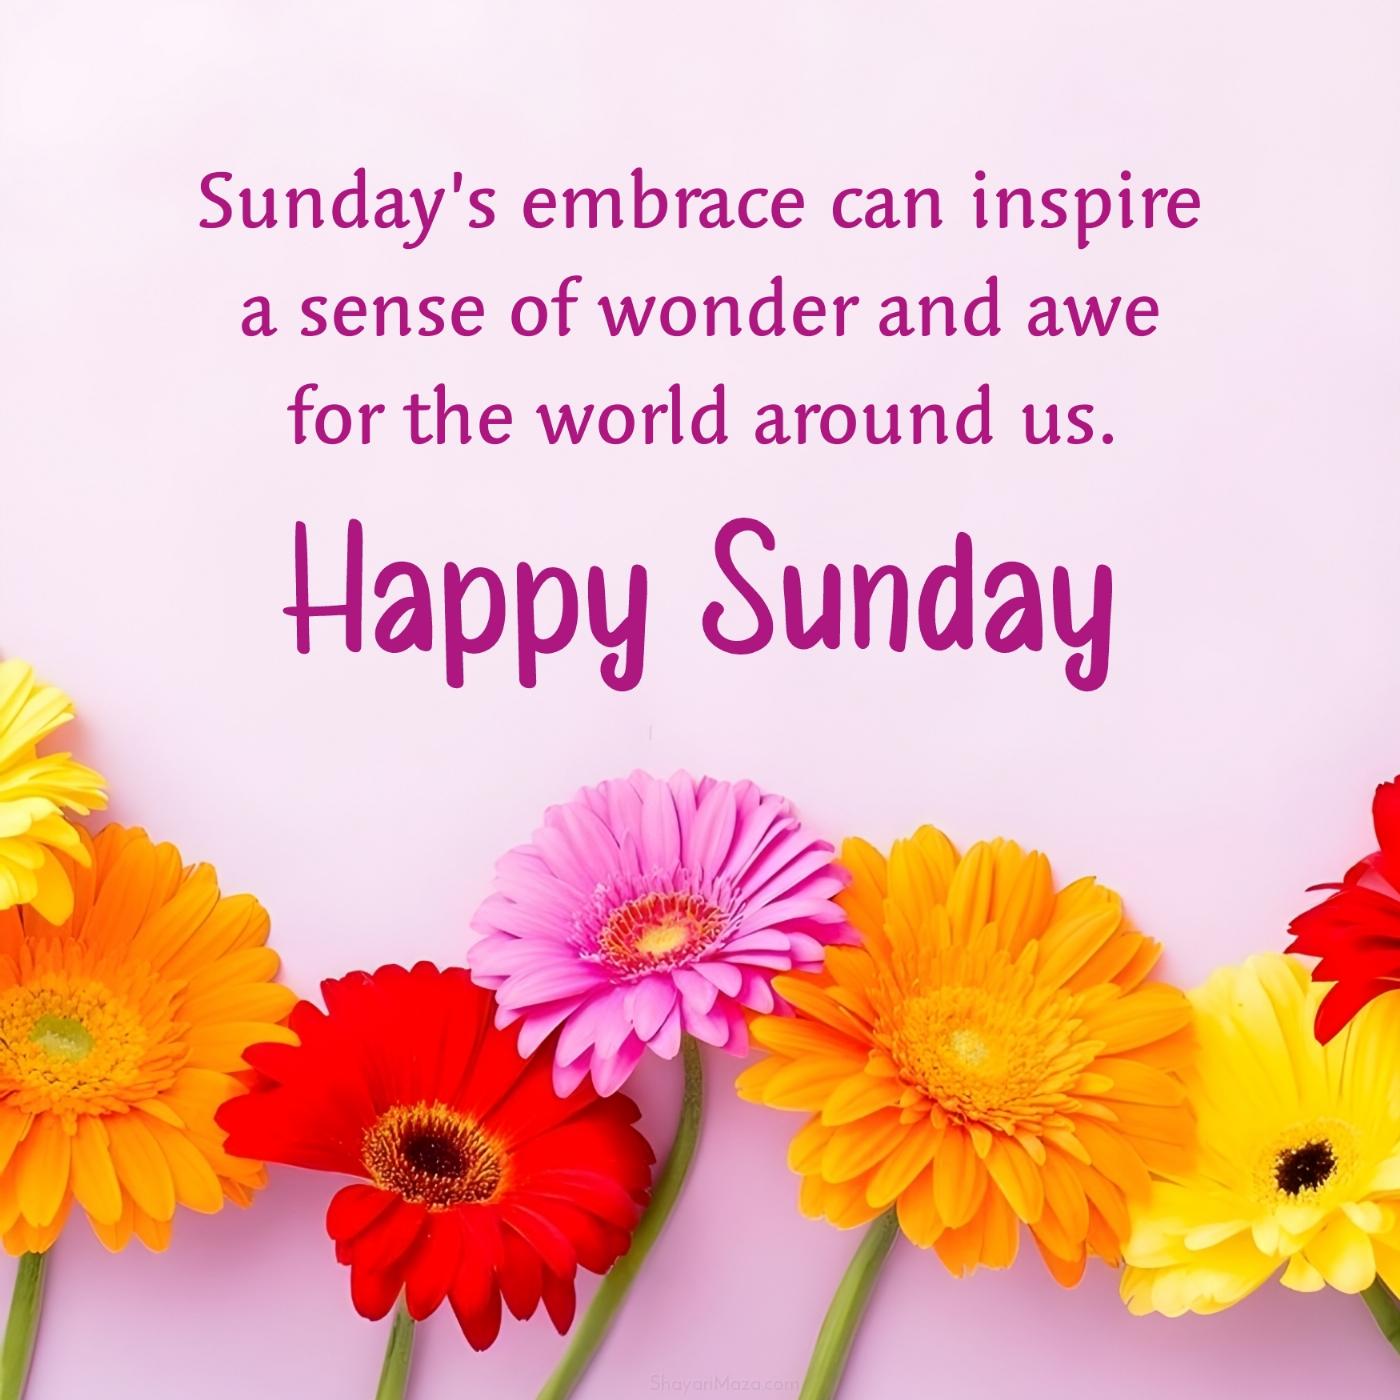 Sundays embrace can inspire a sense of wonder and awe for the world